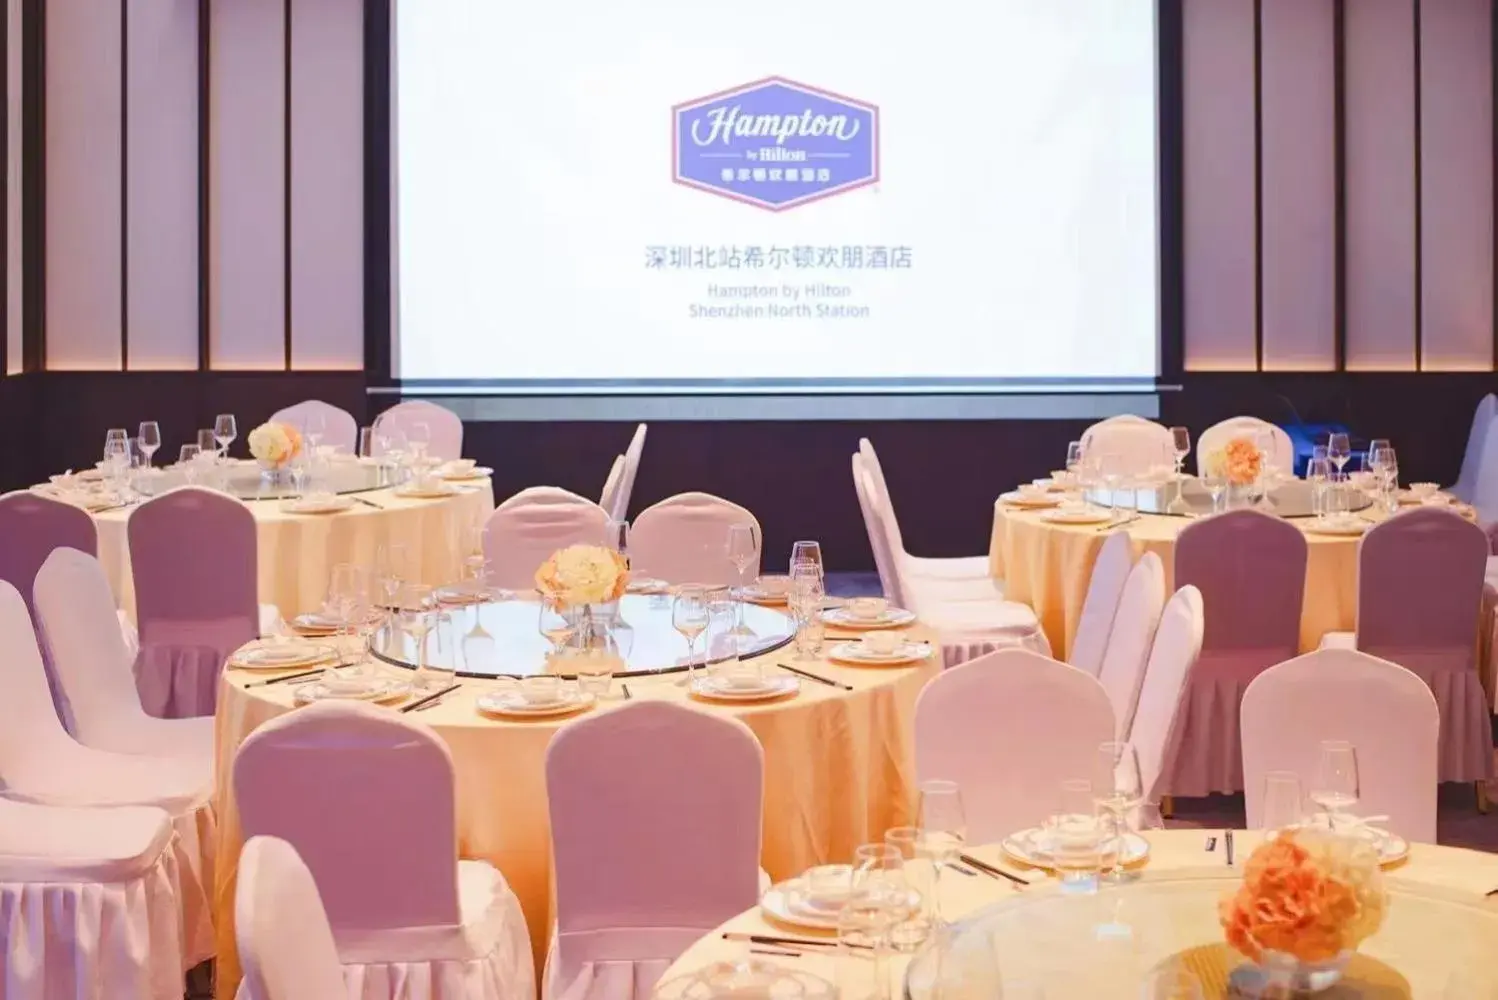 Meeting/conference room, Banquet Facilities in Hampton By Hilton Shenzhen North Station